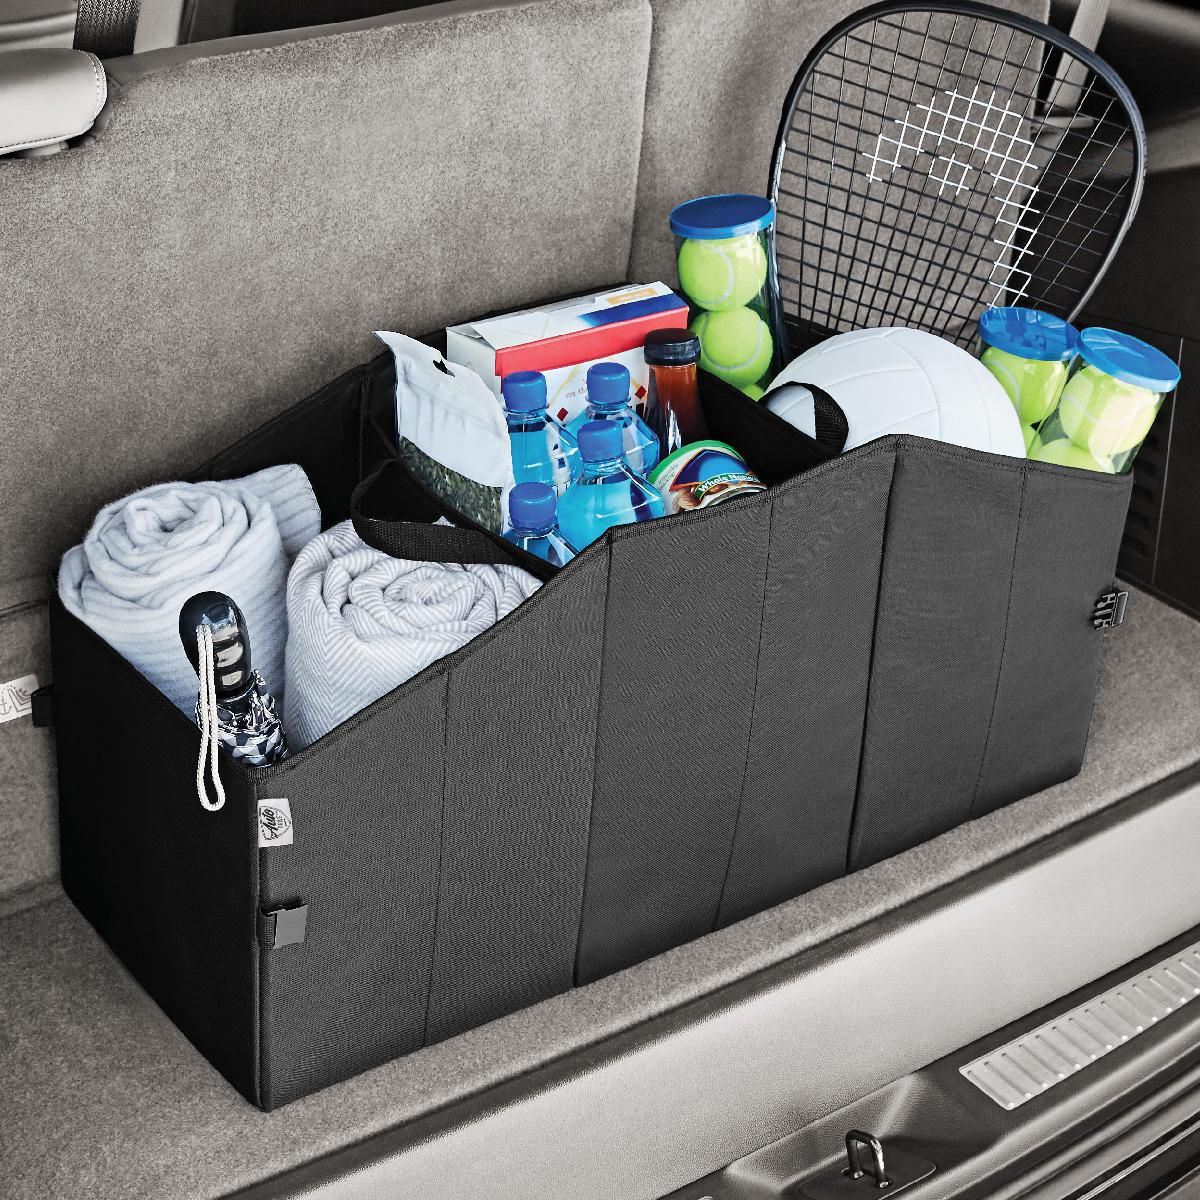 Blueshyhall Car Trunk Boot Storage Organiser Collapsible with Lid Black,Small 